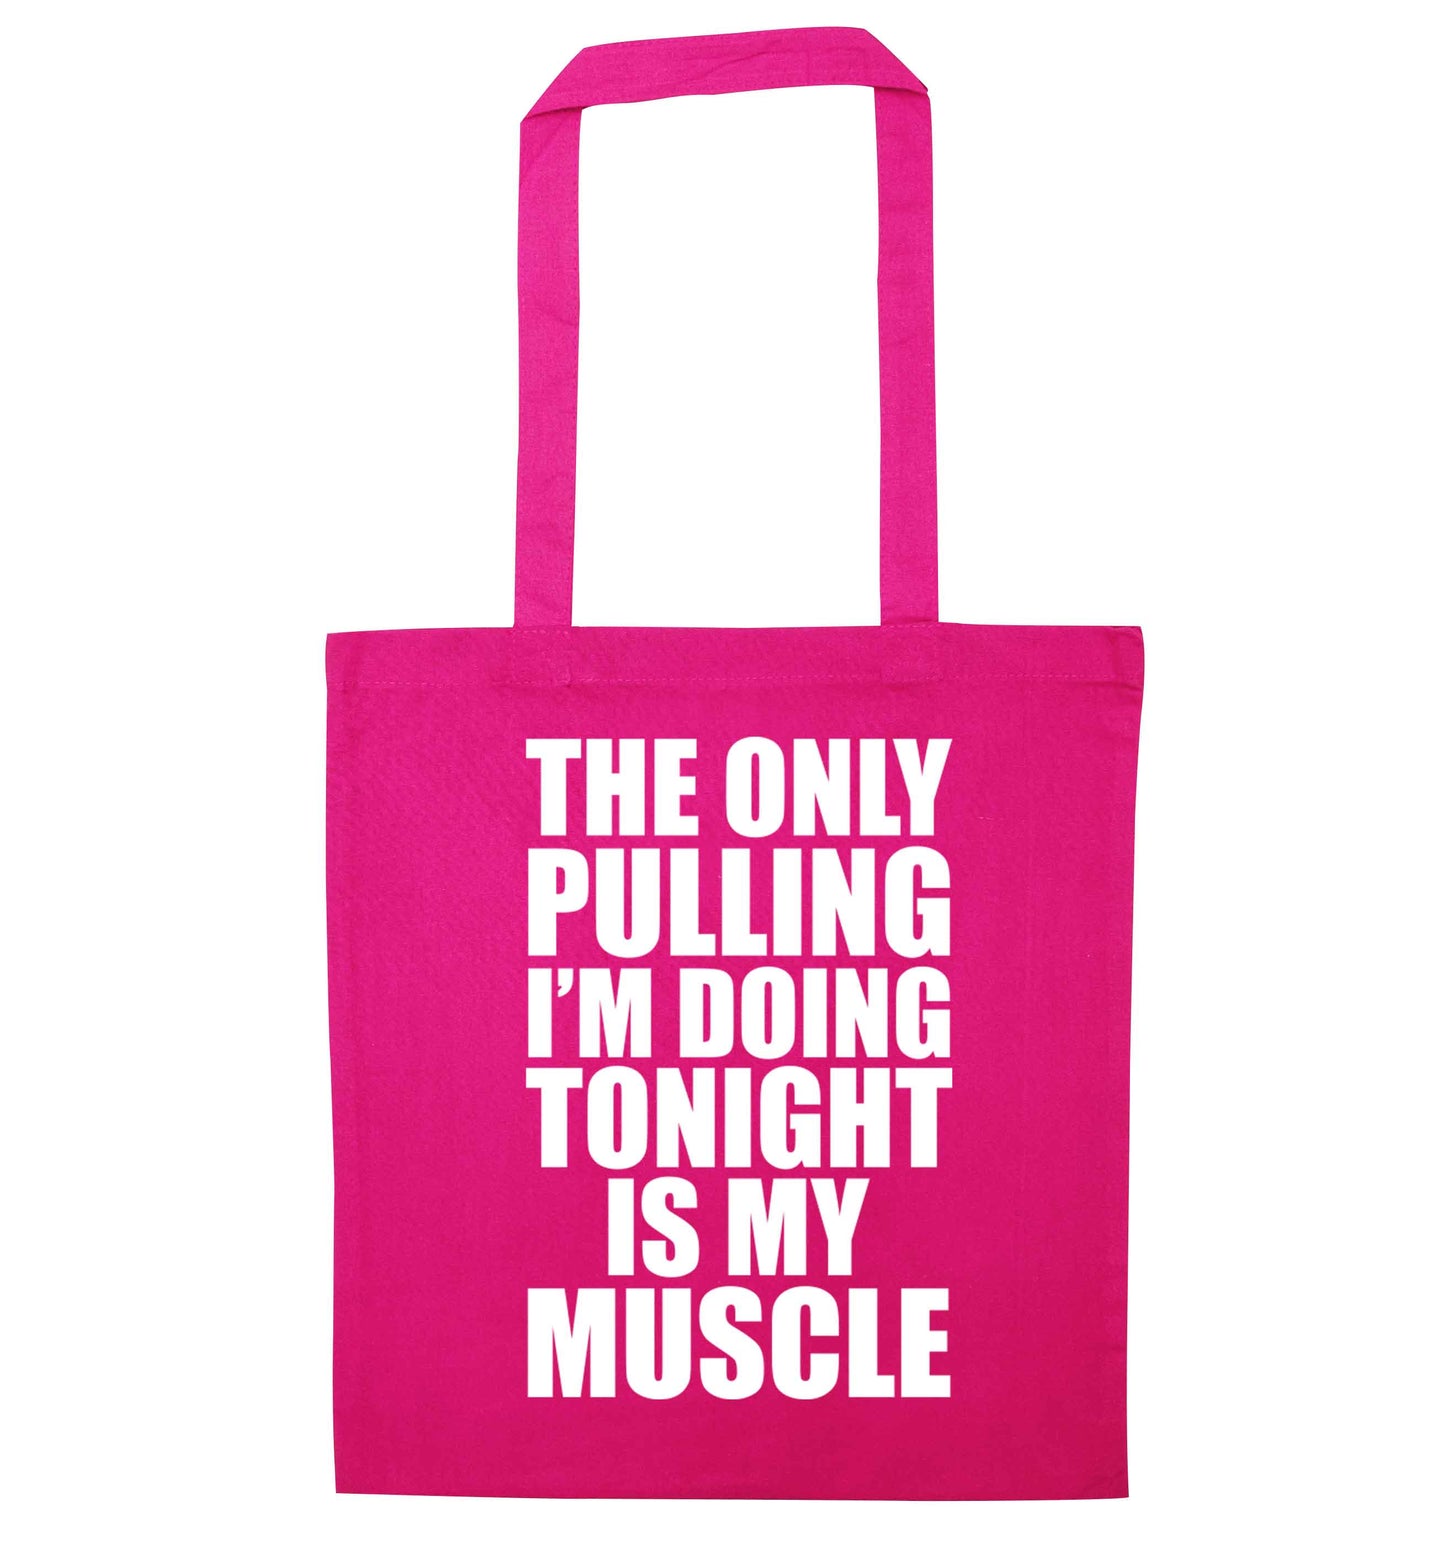 The only pulling I'm doing tonight is my muscle pink tote bag